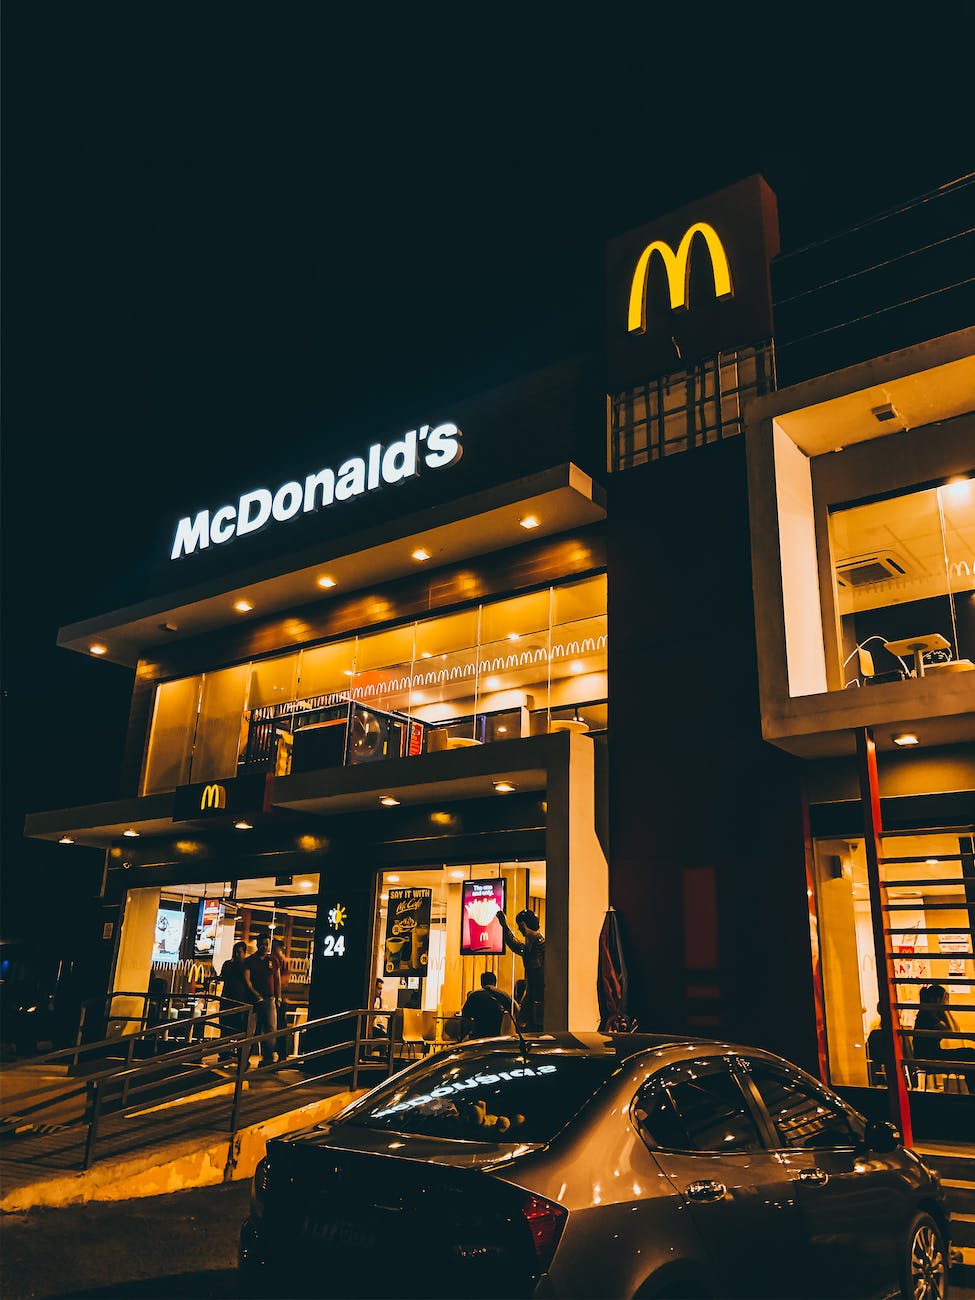 How McDonald’s Cost reduction and Business Strategy helped them sustain globally